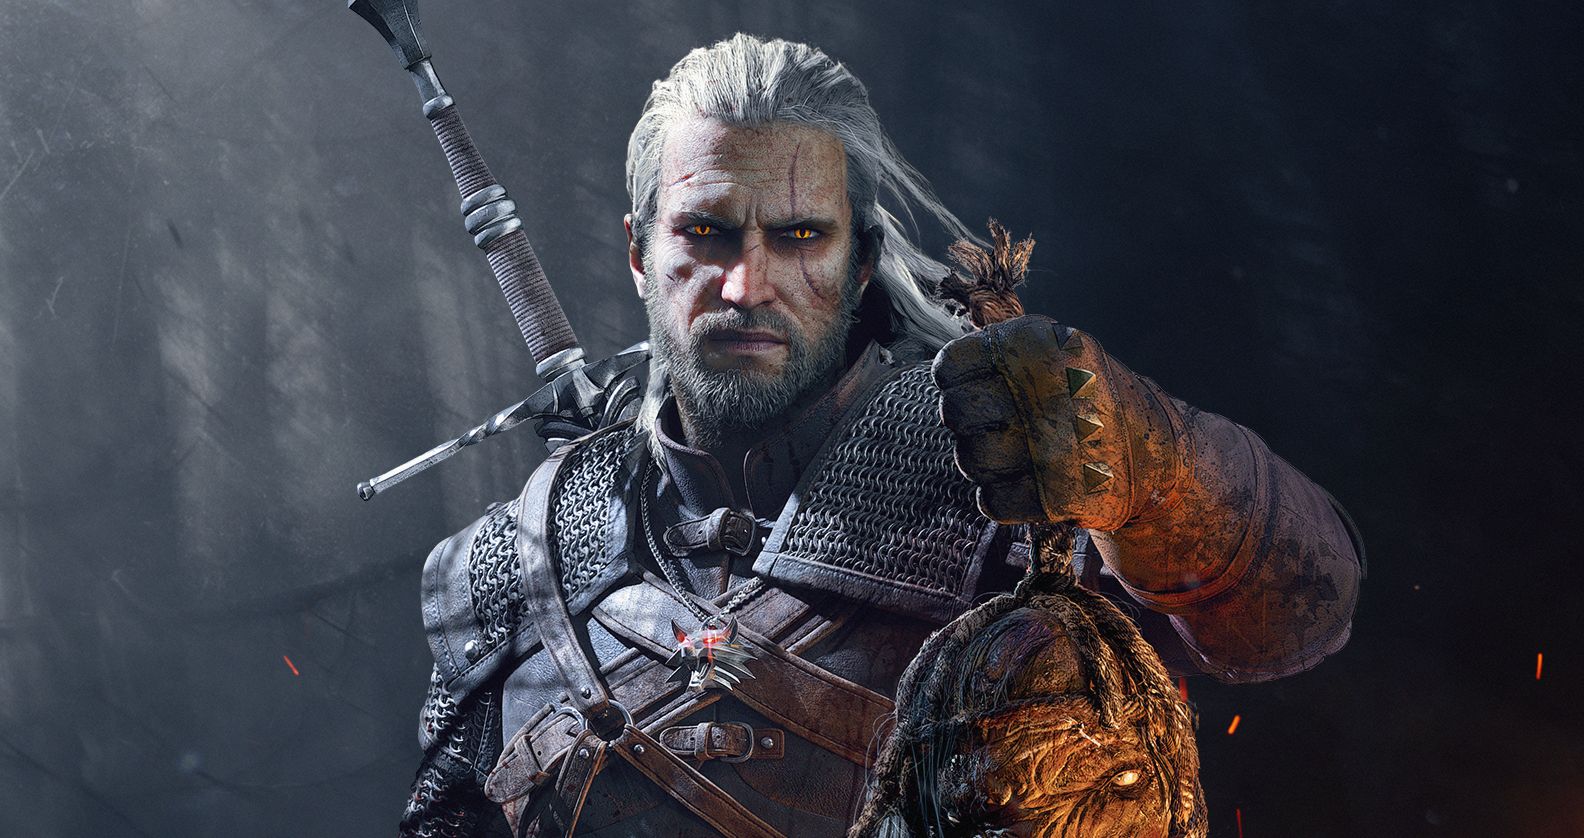 To Claim Free PS4 To PS5 Upgrade For The Witcher 3